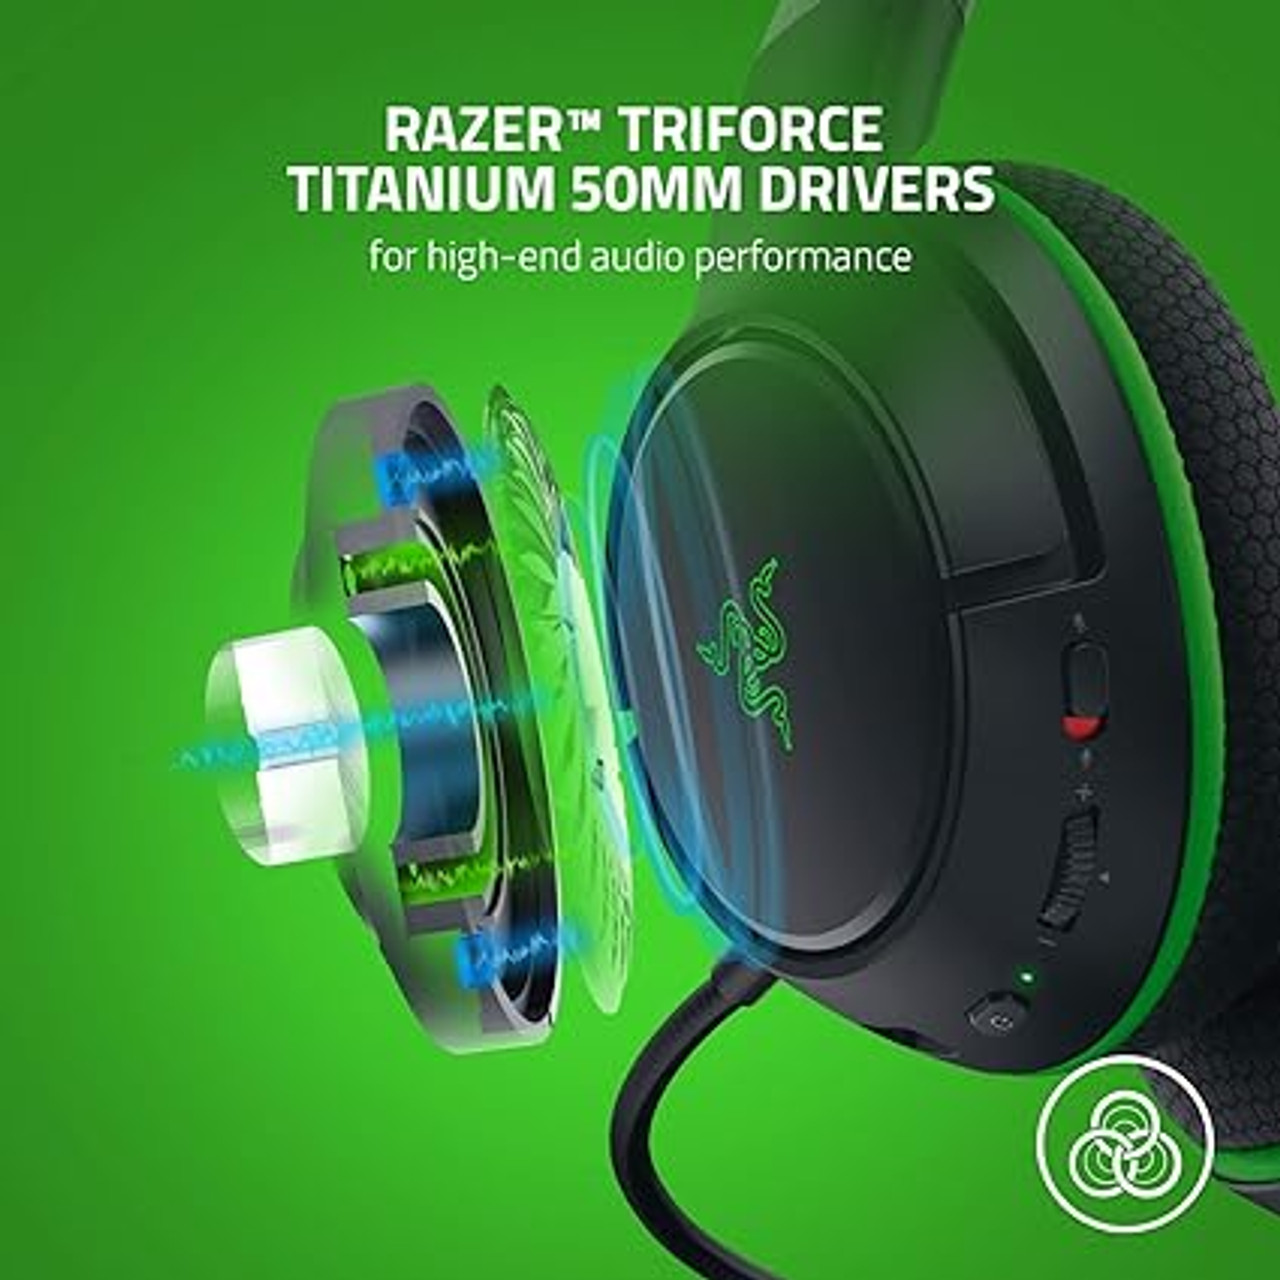 Razer Kaira X Wired Headset for Xbox Series X|S, Xbox One, PC, Mac & Mobile  Devices: TriForce 50mm Drivers - HyperClear Cardioid Mic - Flowknit Memory